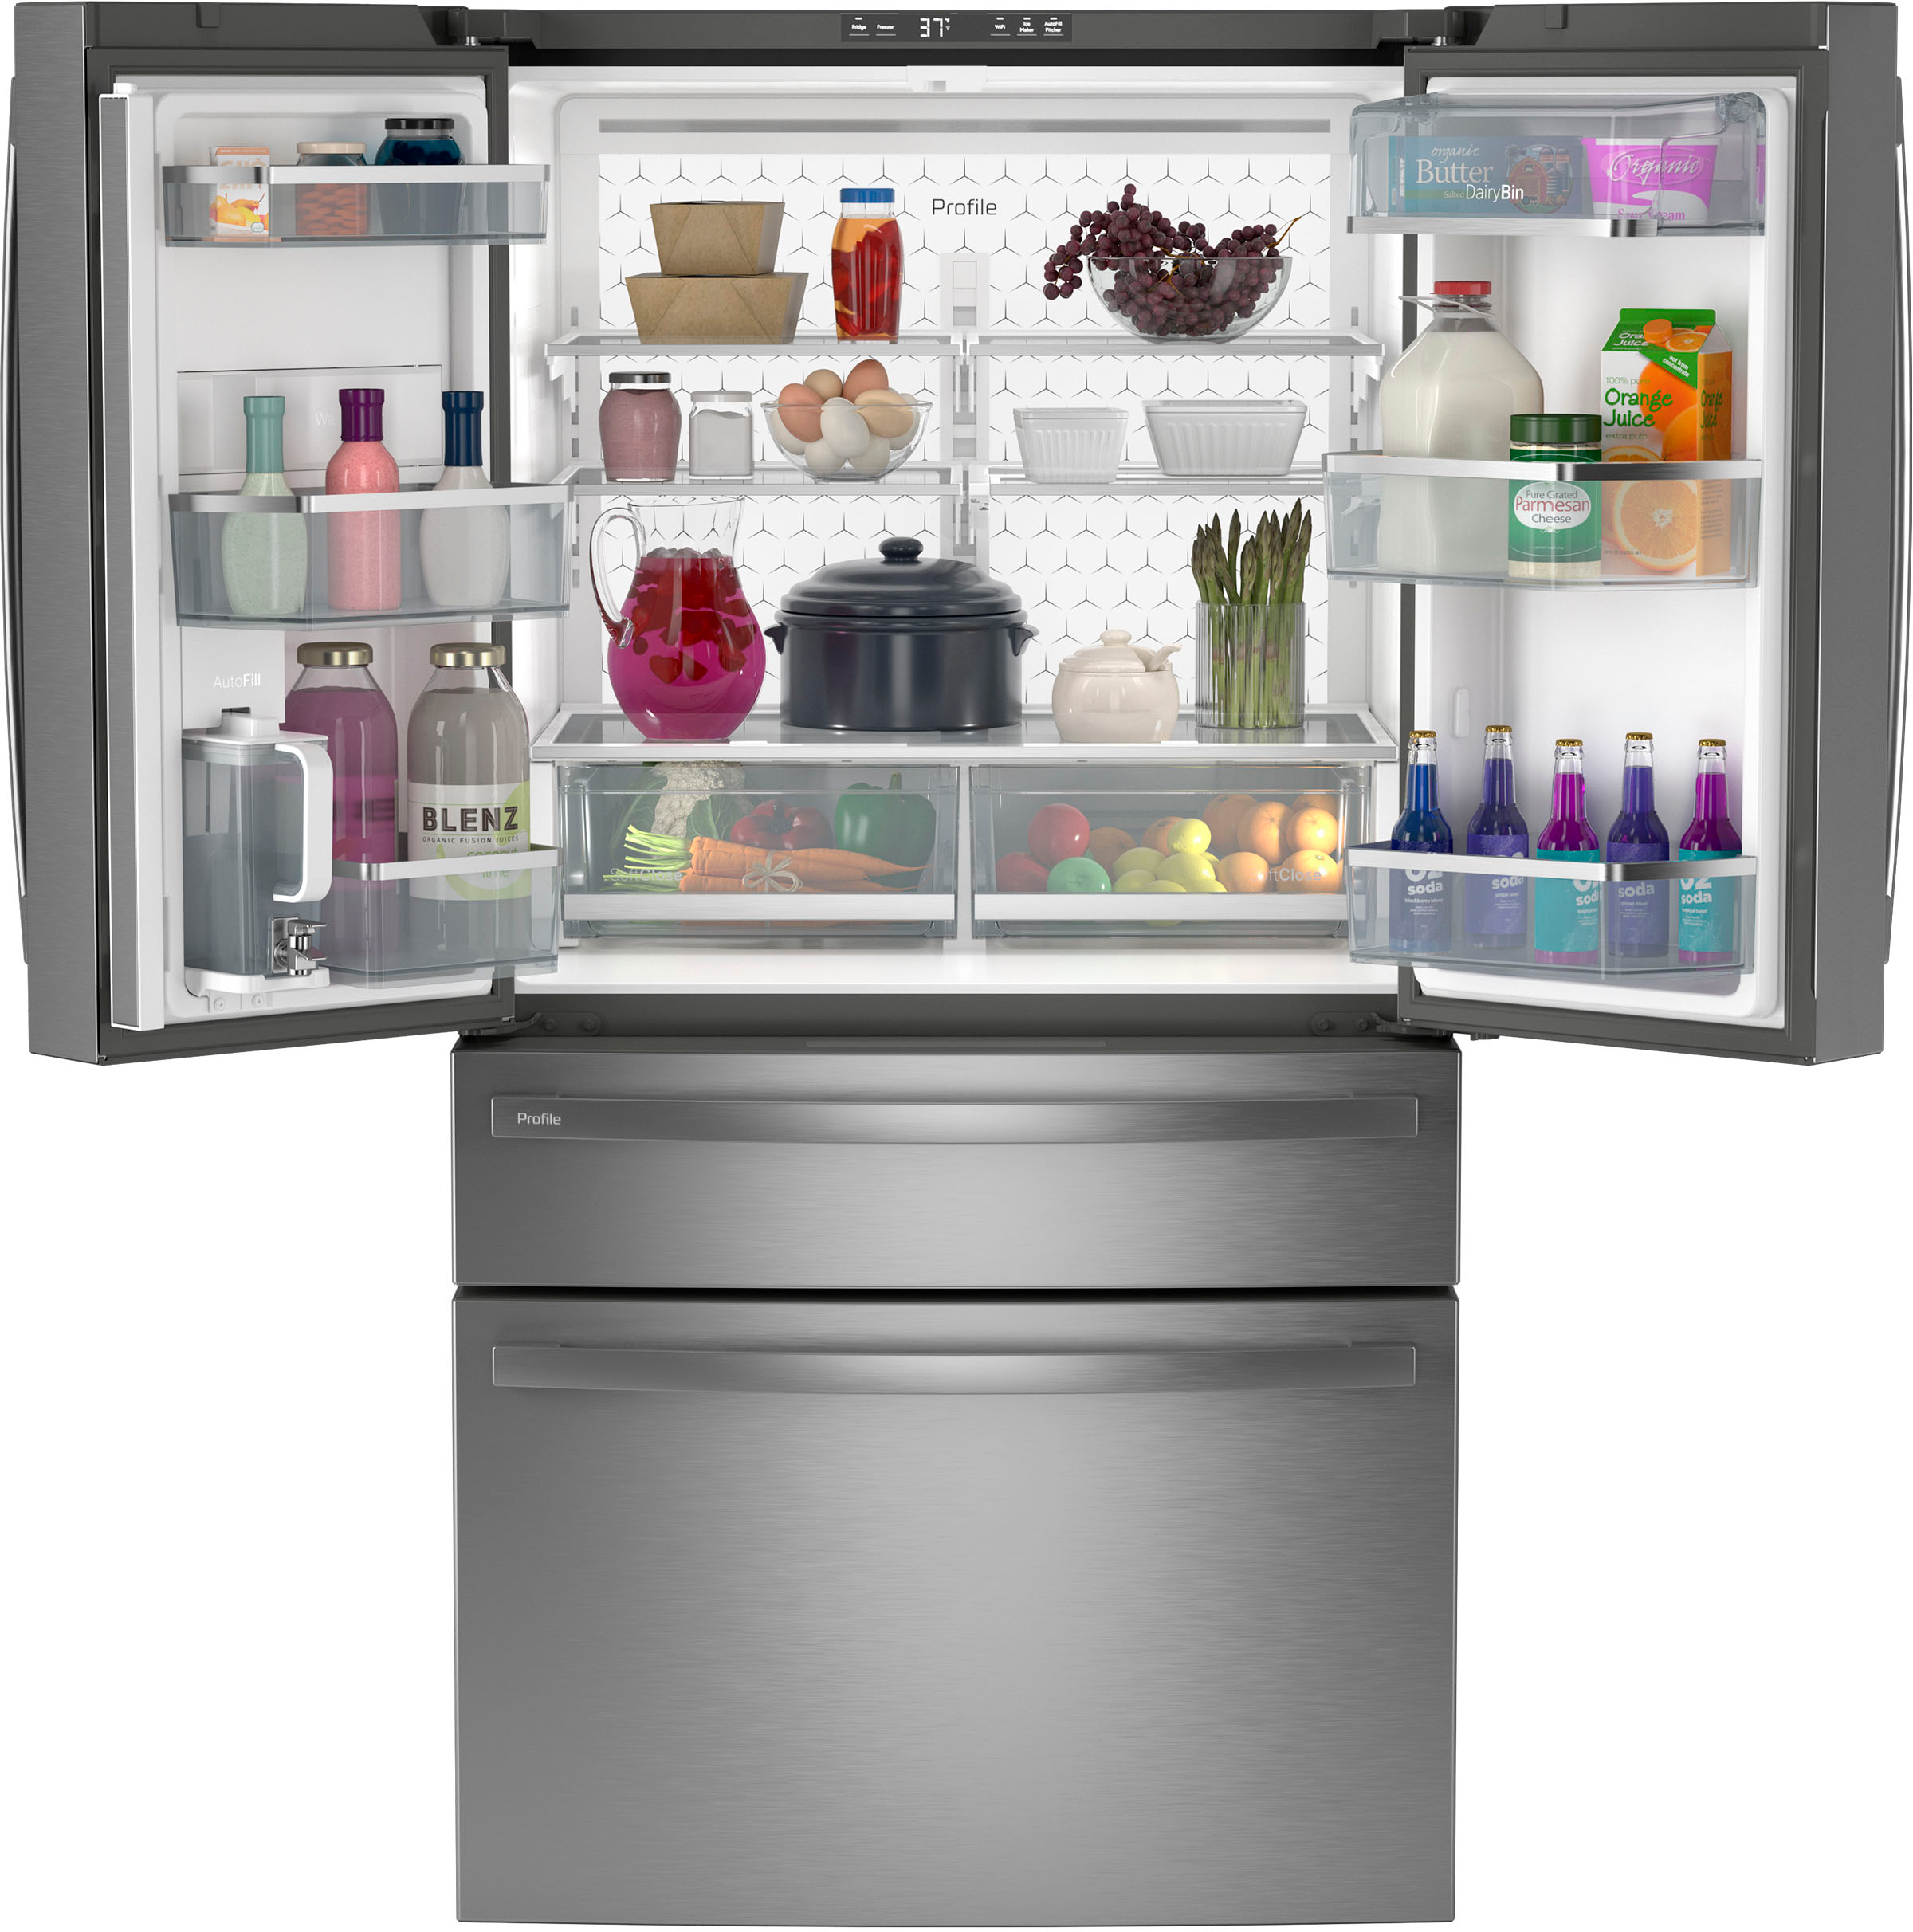 GE GAS18PSJSS Top Freezer Refrigerator with Autofill Pitcher review: Get  automatic water pitcher fill-ups from this top-freezer fridge - CNET